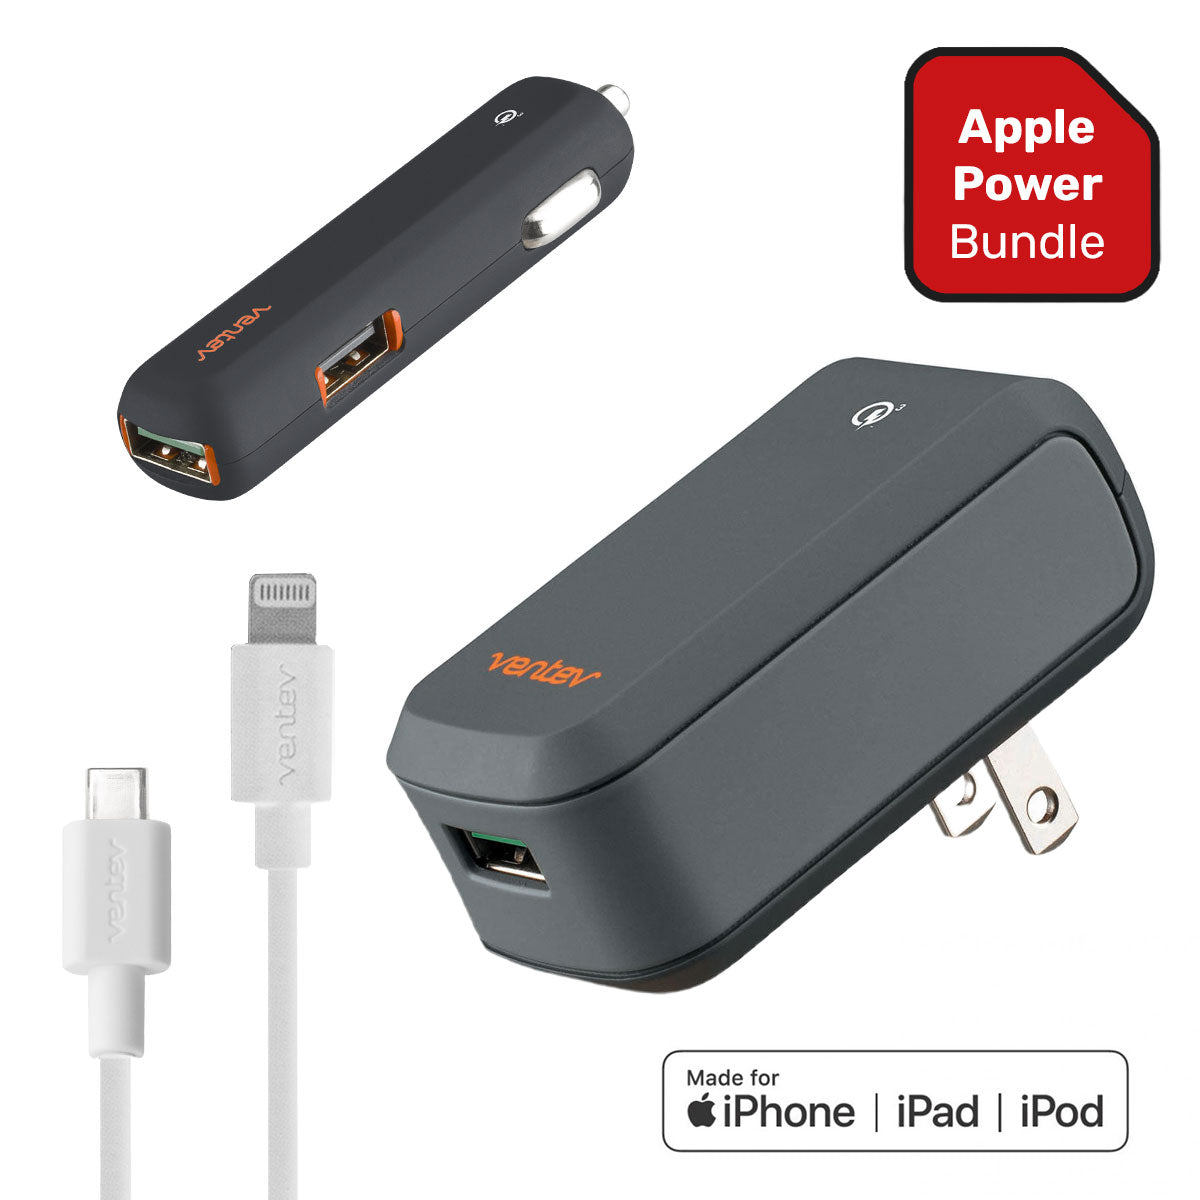 Ventev Power Bundle For Apple Devices - Wall/Car Charger & Cable